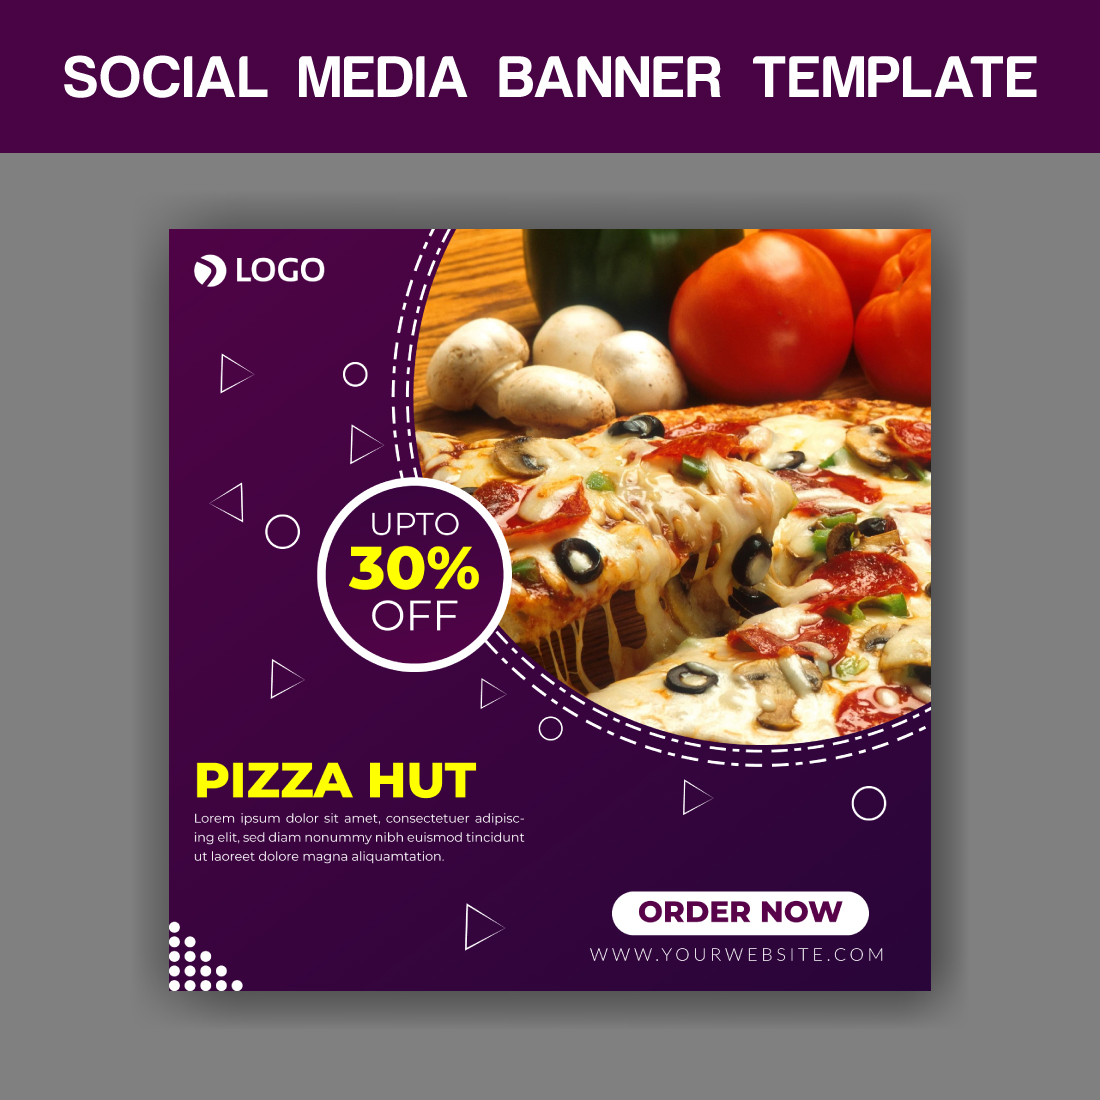 Pizza Social Media Banner Template cover image.